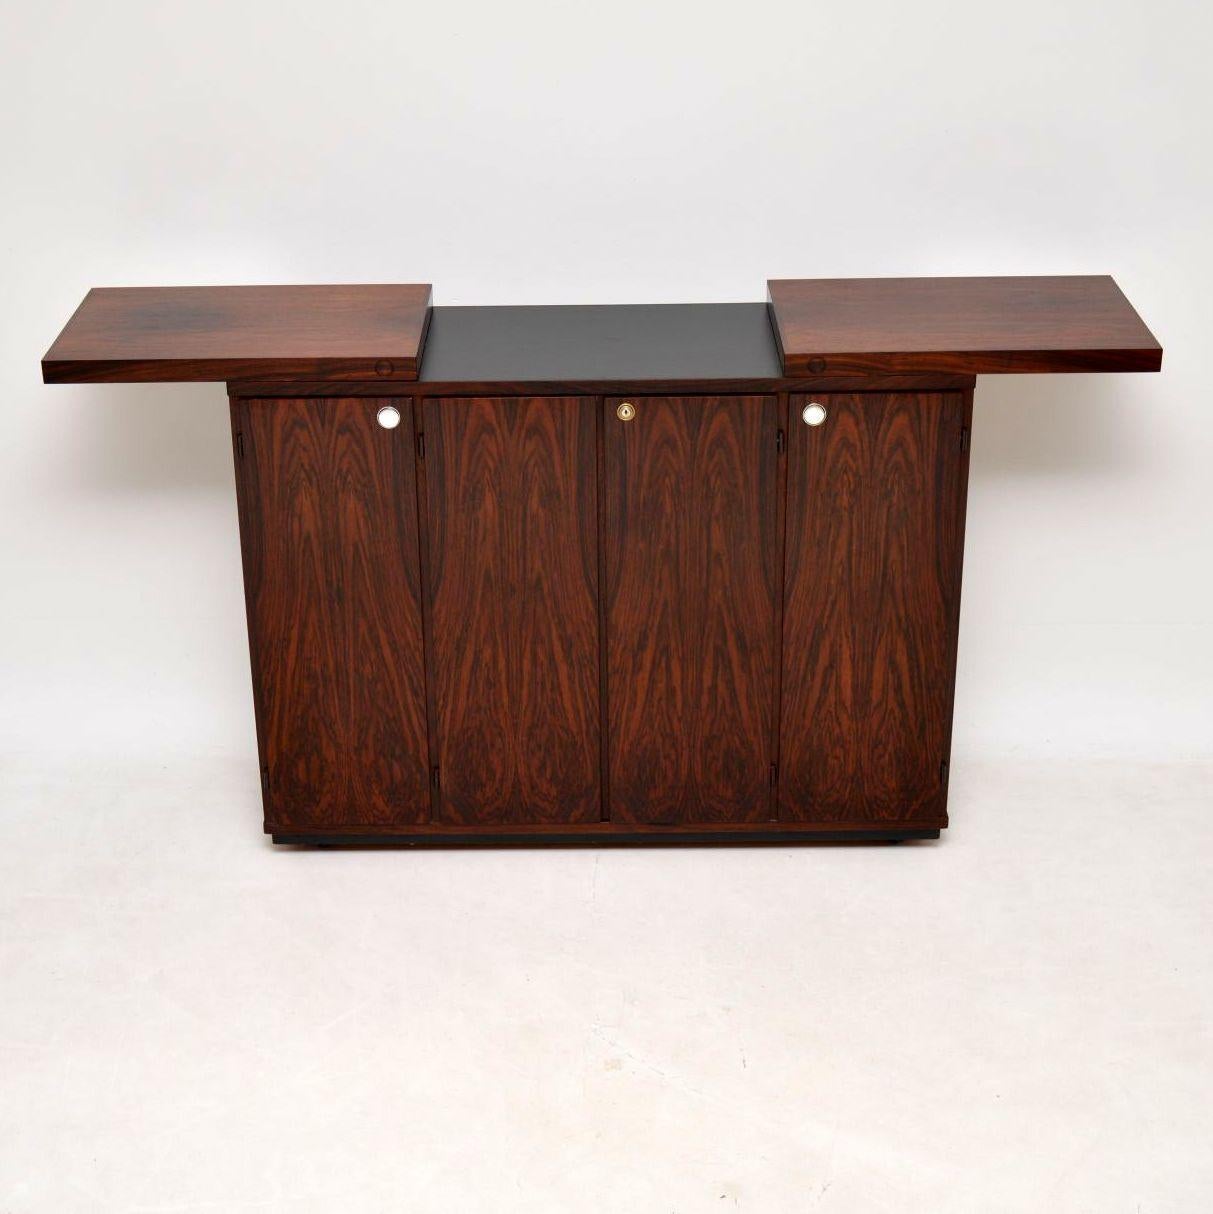 A superb and rare vintage drinks cabinet or serving bar, this was made in Denmark by Dyrlund, it dates from the 1960s. It has stunning wood grain patterns throughout, even inside the cabinets and on the back. The condition is superb for its age,